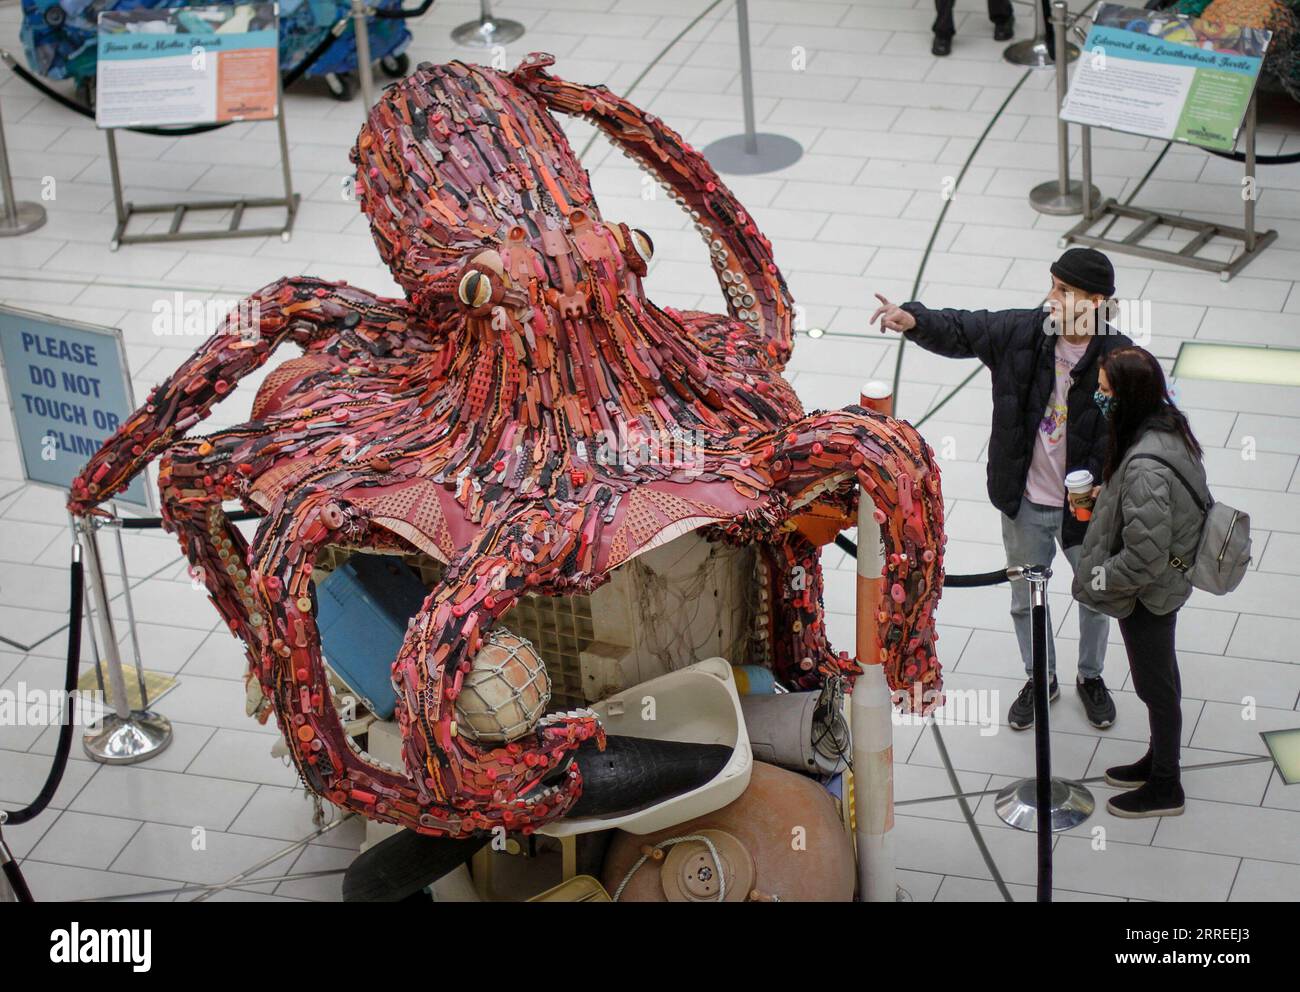 220224 -- BURNABY, Feb. 24, 2022 -- People look at an octopus art sculpture made from plastic marine debris during the Washed Ashore exhibition at Metrotown mall in Burnaby, British Columbia, Canada, Feb. 23, 2022. The Washed Ashore art sculpture exhibition came to Western Canada for the first time featuring 9 giant marine wildlife sculptures made entirely from plastic marine debris that has been collected from the Pacific Ocean. The exhibition runs from Feb. 23 to April 30. Photo by /Xinhua CANADA-BURNABY-ART SCULPTURES-OCEAN WASTE LiangxSen PUBLICATIONxNOTxINxCHN Stock Photo